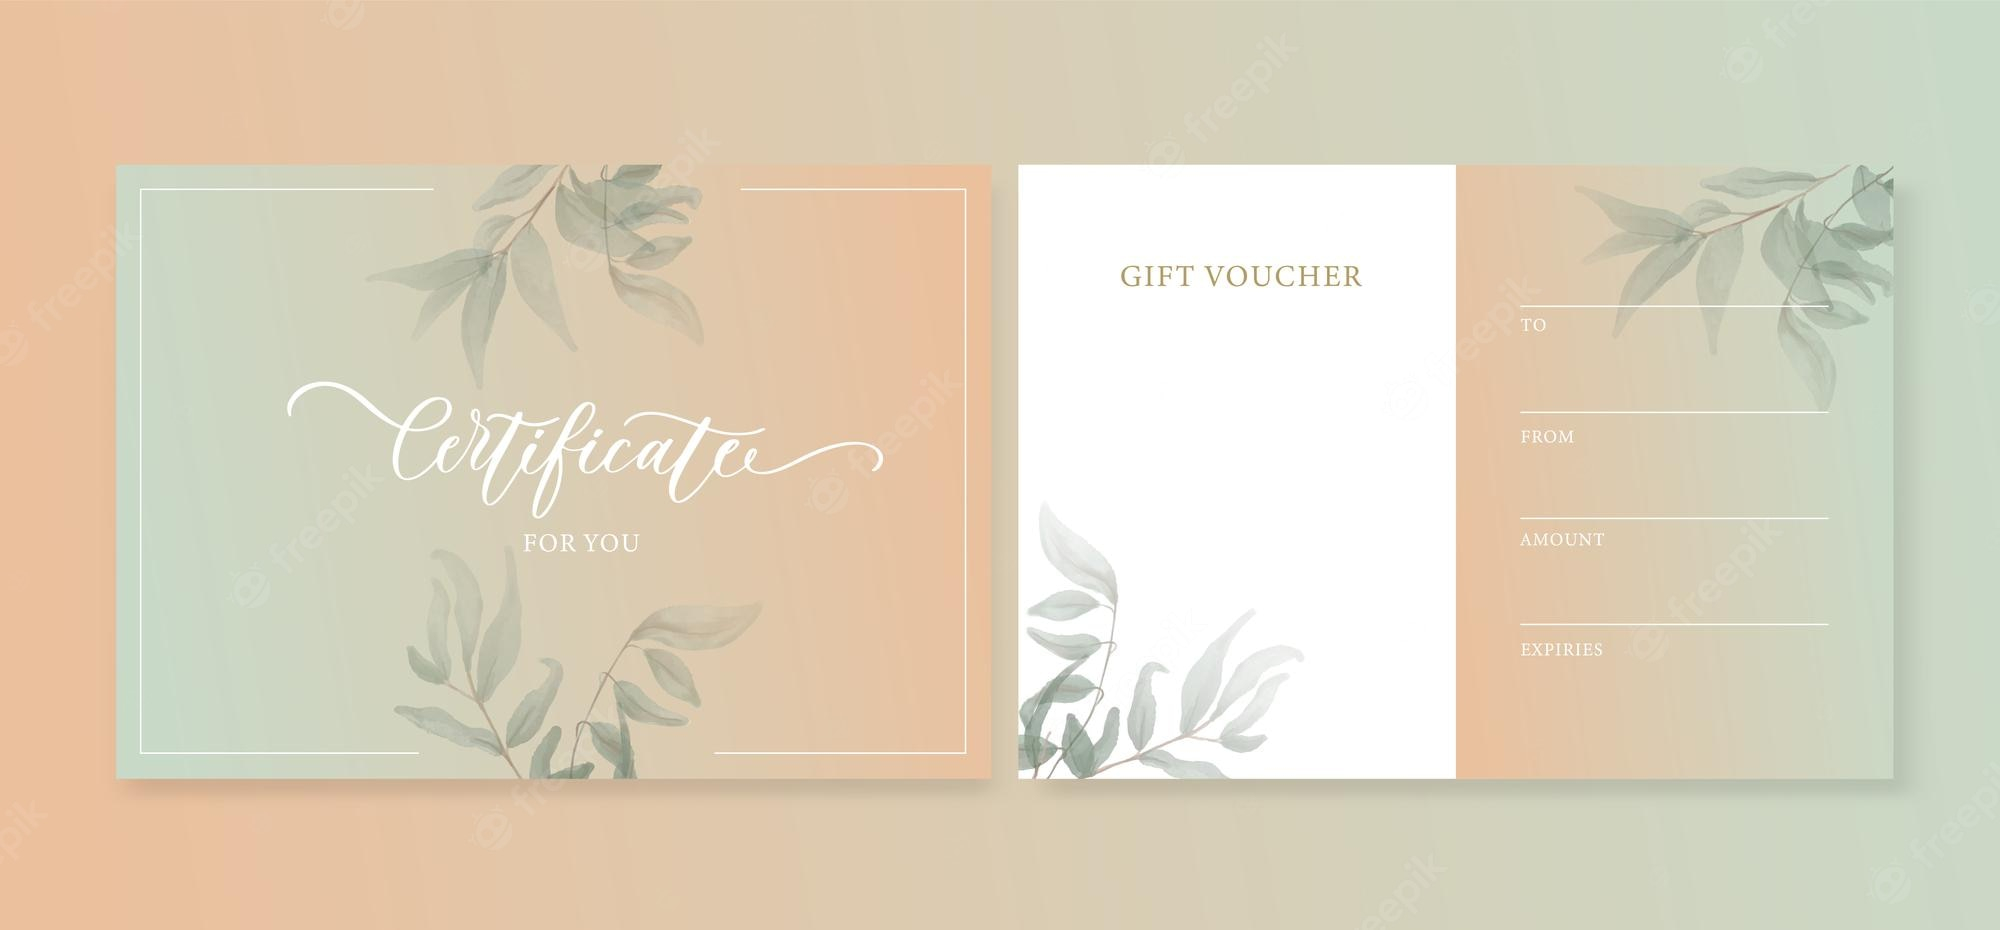 Spa gift certificate Vectors & Illustrations for Free Download